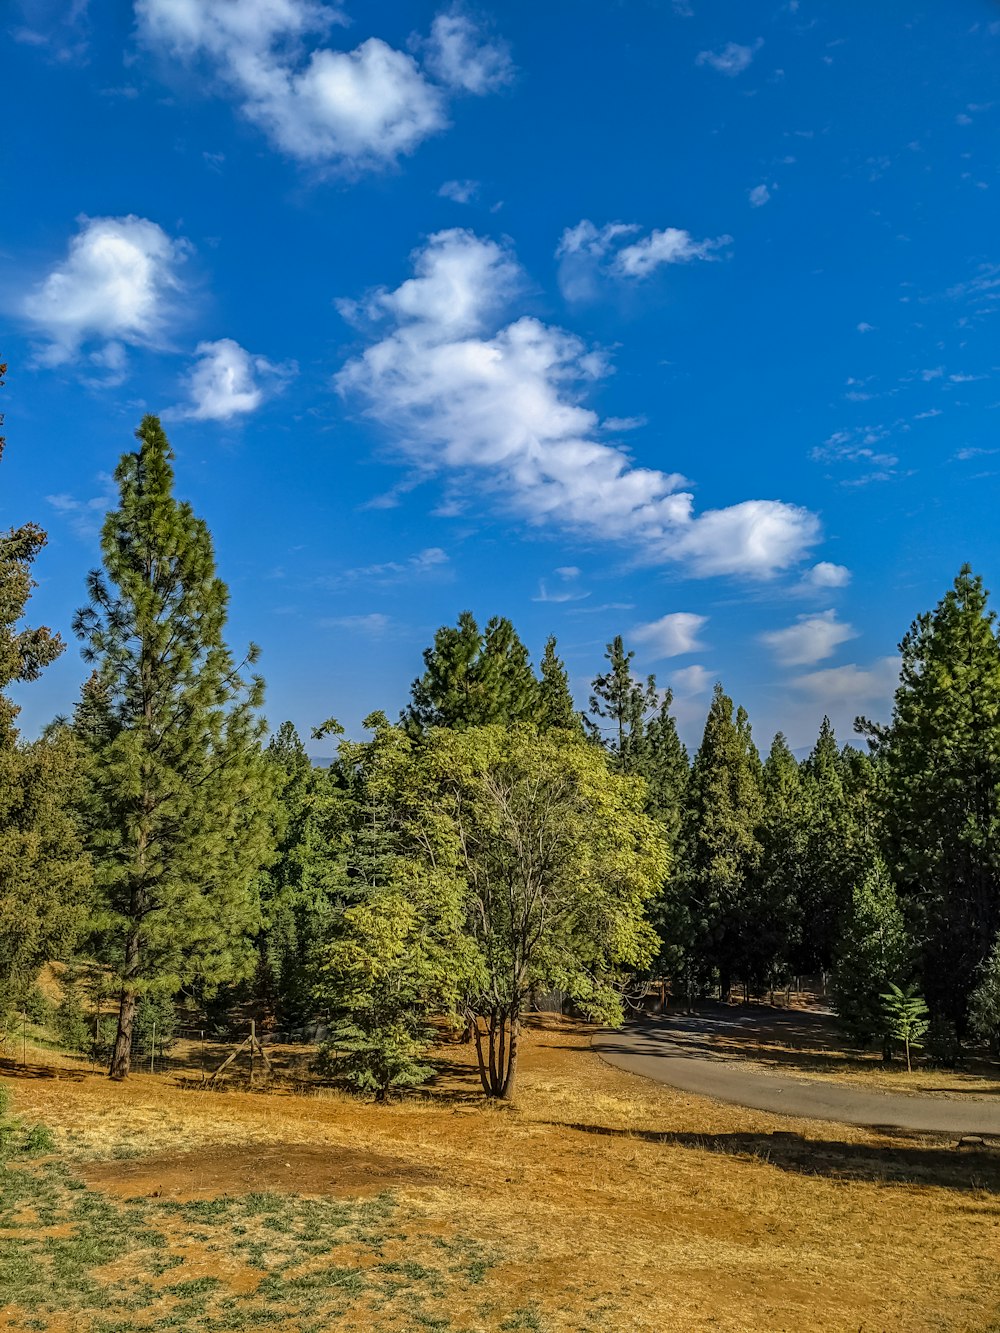 a dirt road surrounded by trees under a blue sky